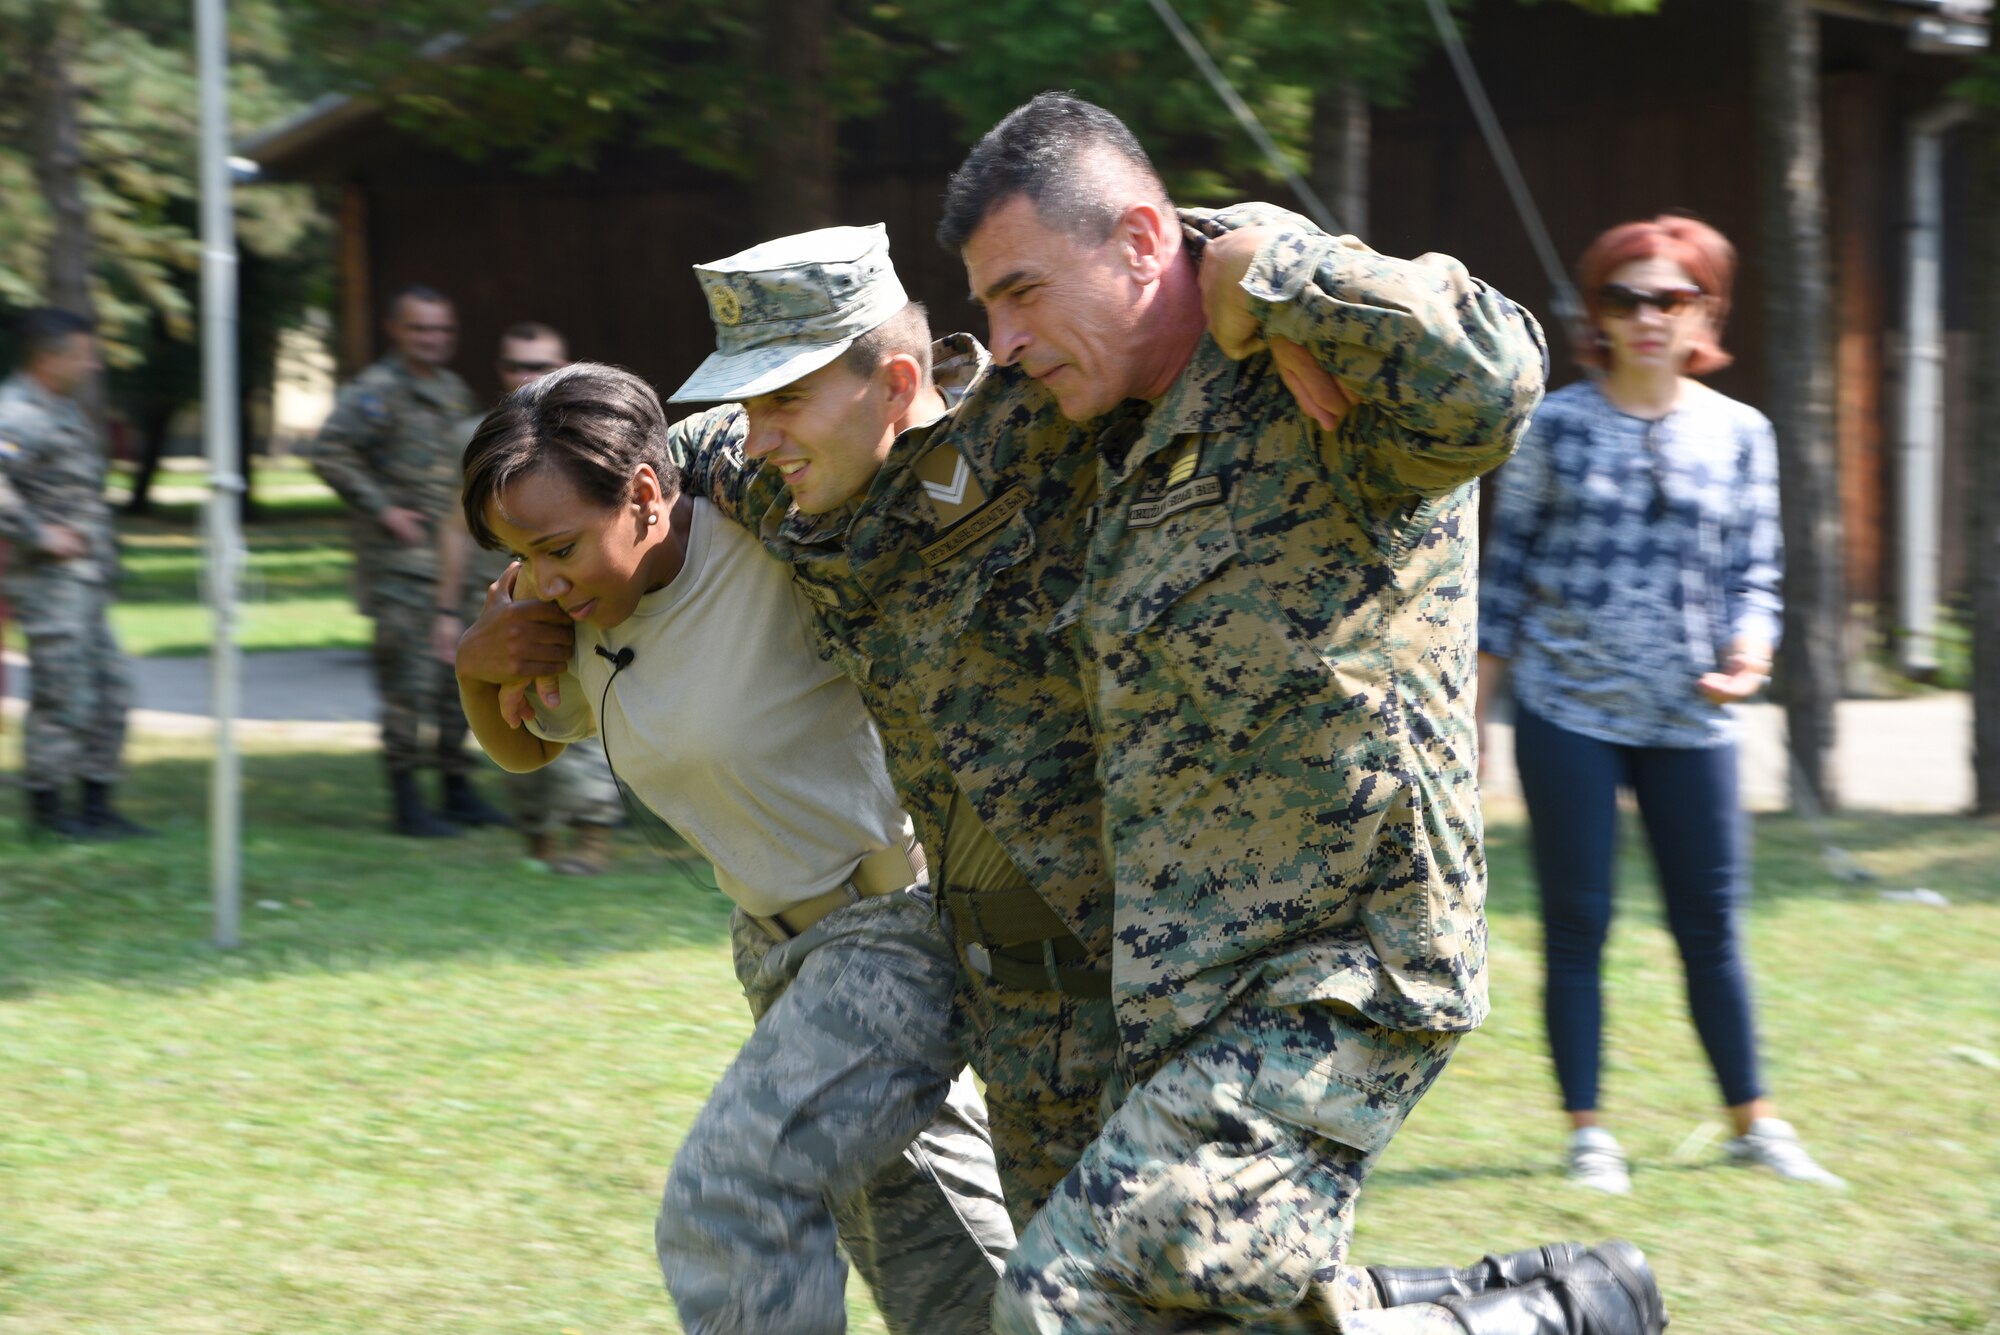 Tech. Sgt. Patricia Medina, medical administrator, 175th Medical Group, Maryland Air National Guard performs a SEAL Team Three carry with members of the Armed Forces of Bosnia-Herzegovina, during a medical training exercise August 26, 2019, Banja Luka, Bosnia. Throughout the training, soldiers of the Armed Forces of Bosnia-Herzegovina received classroom instruction in addition to hands-on tactical combat casualty care application training. (U.S. Air National Guard photo by Staff Sgt. Enjoli Saunders)